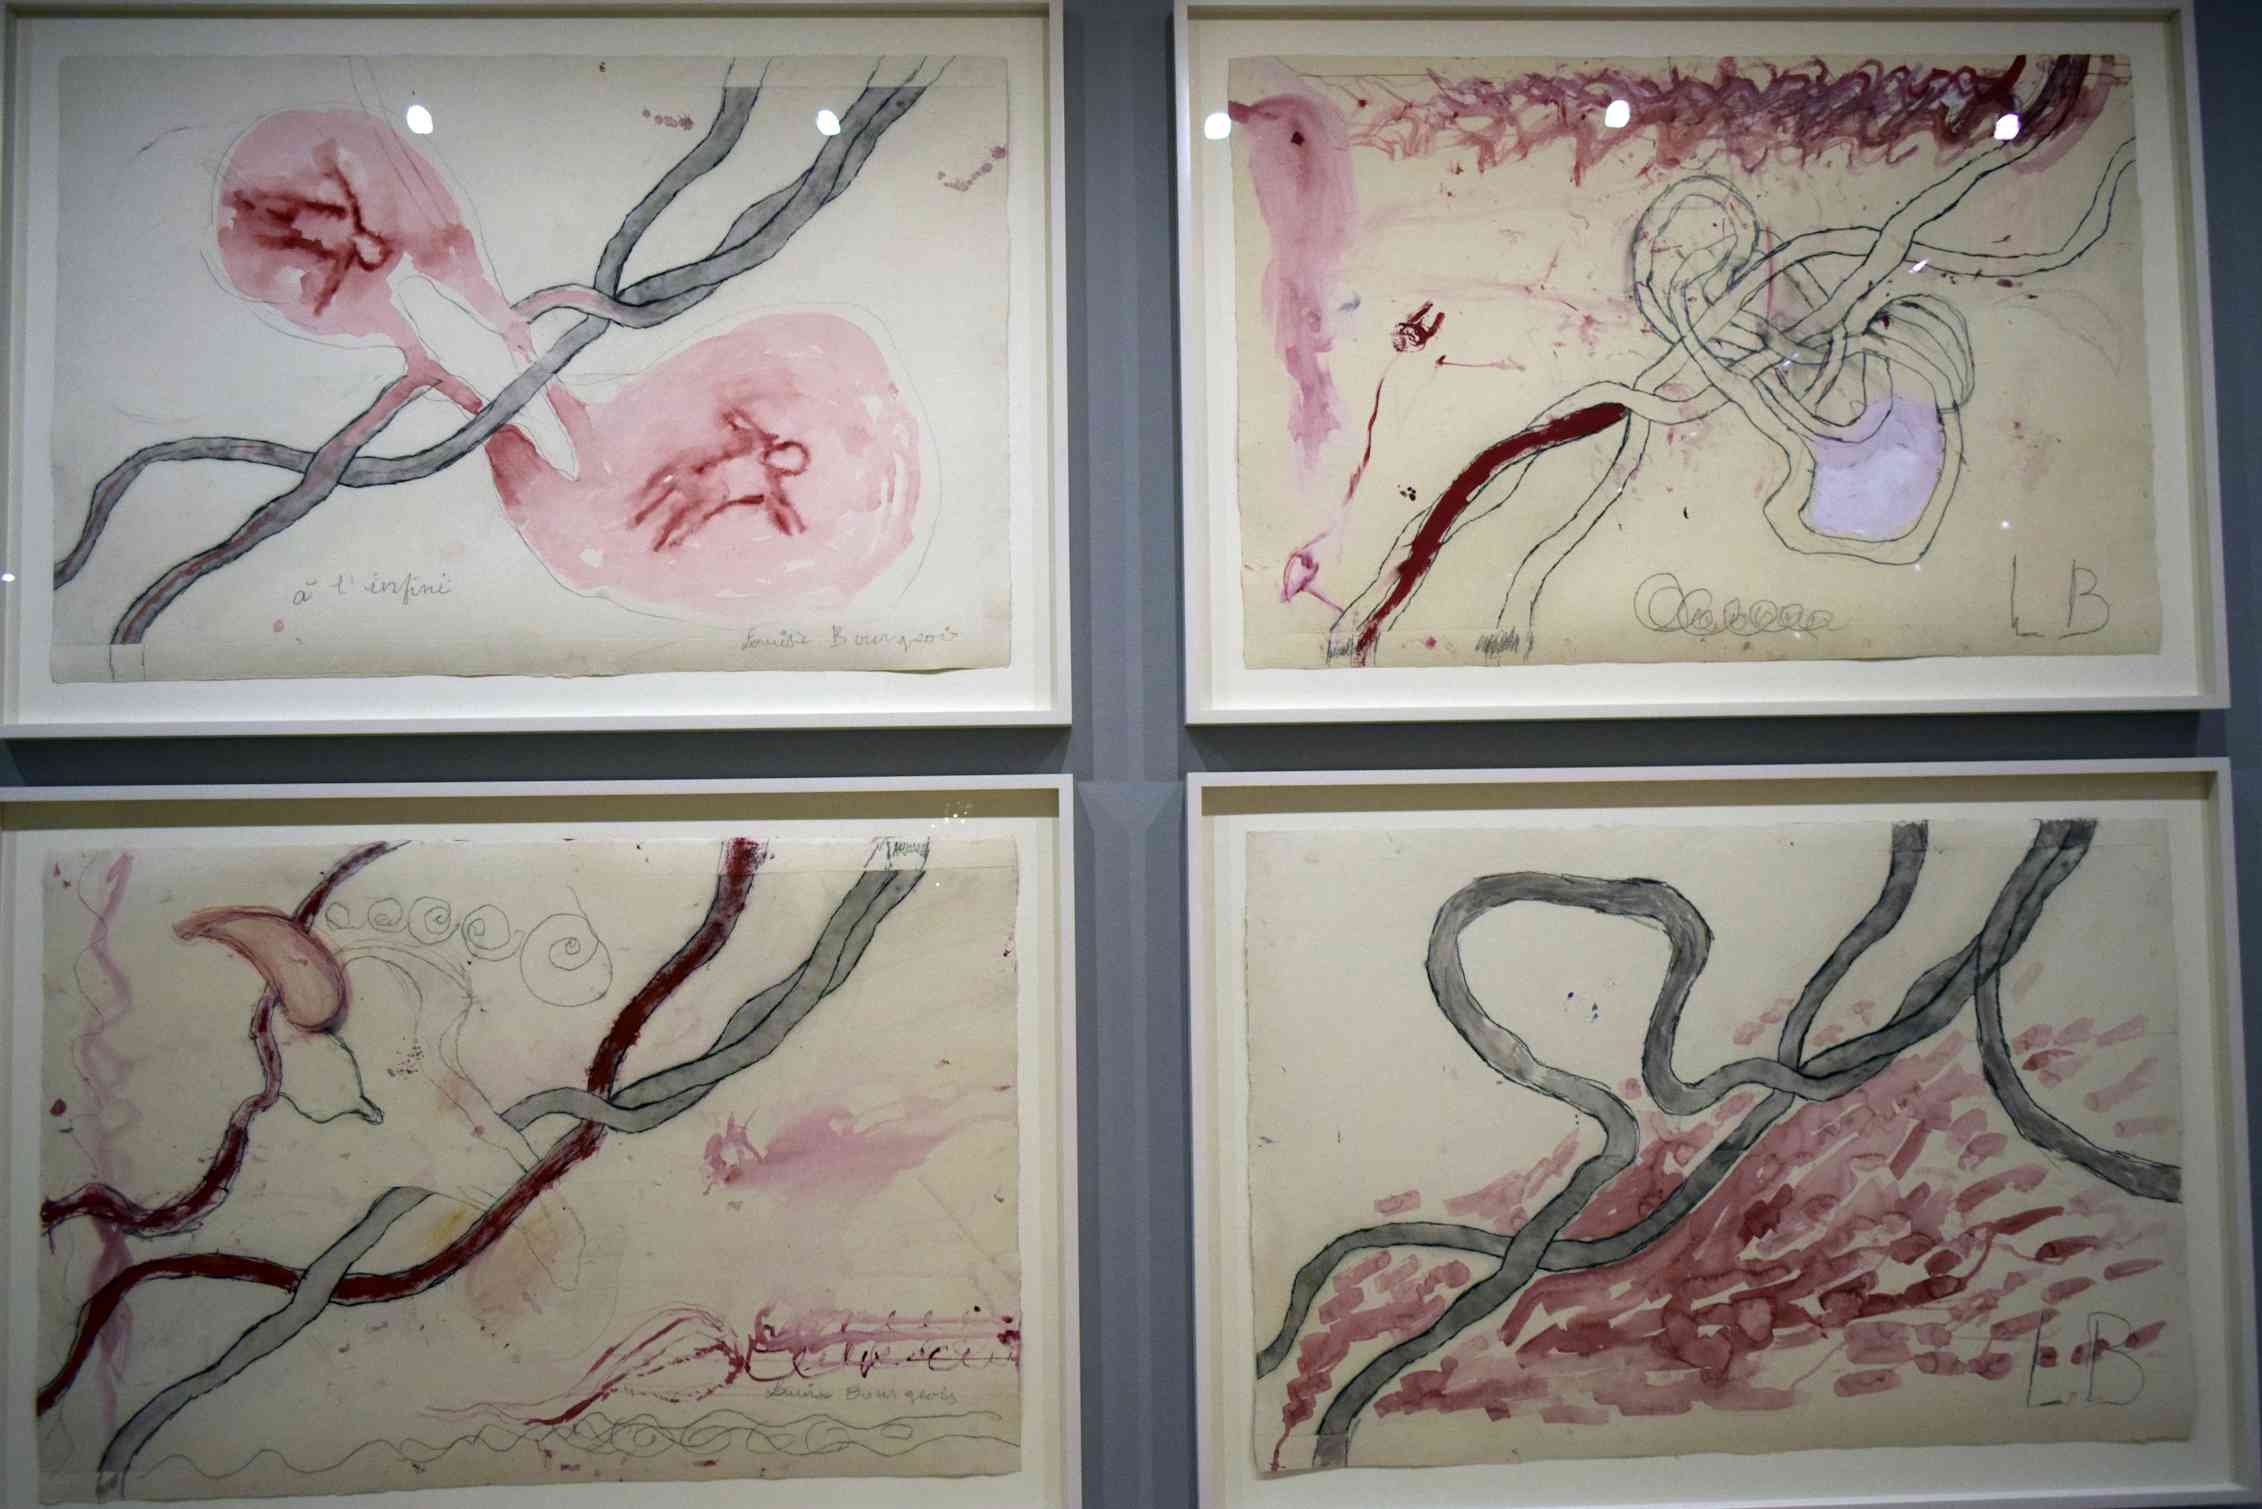 Images of the placenta and umbilical cord.